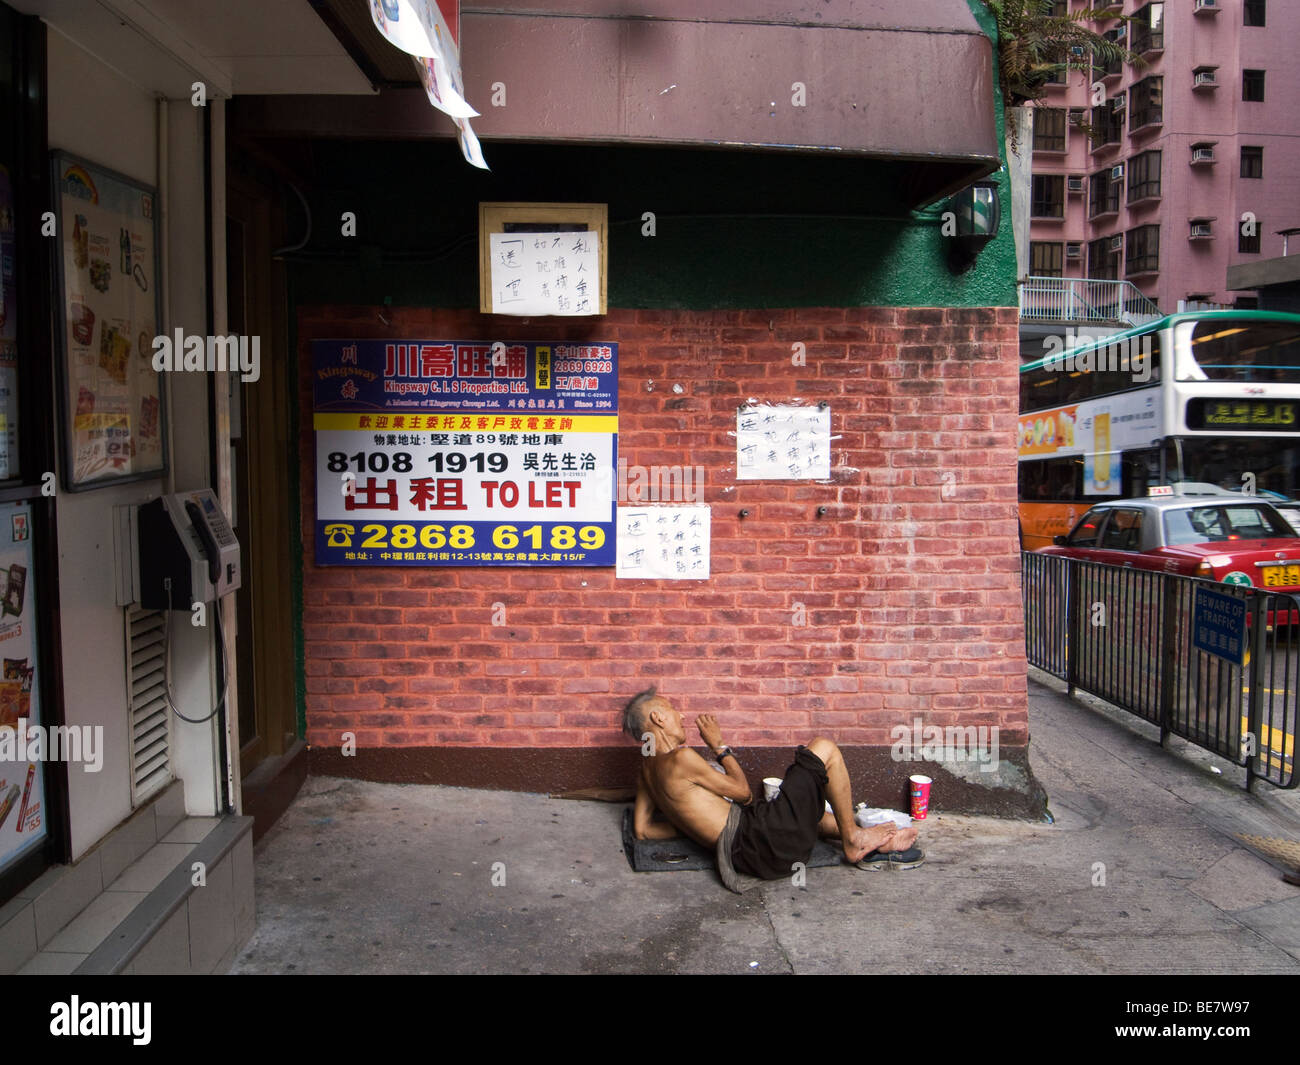 Hong Kong. Tramp  on Caine Road, a typical busy middleclass neighbourhood  On the wall ads from a property agent. Stock Photo